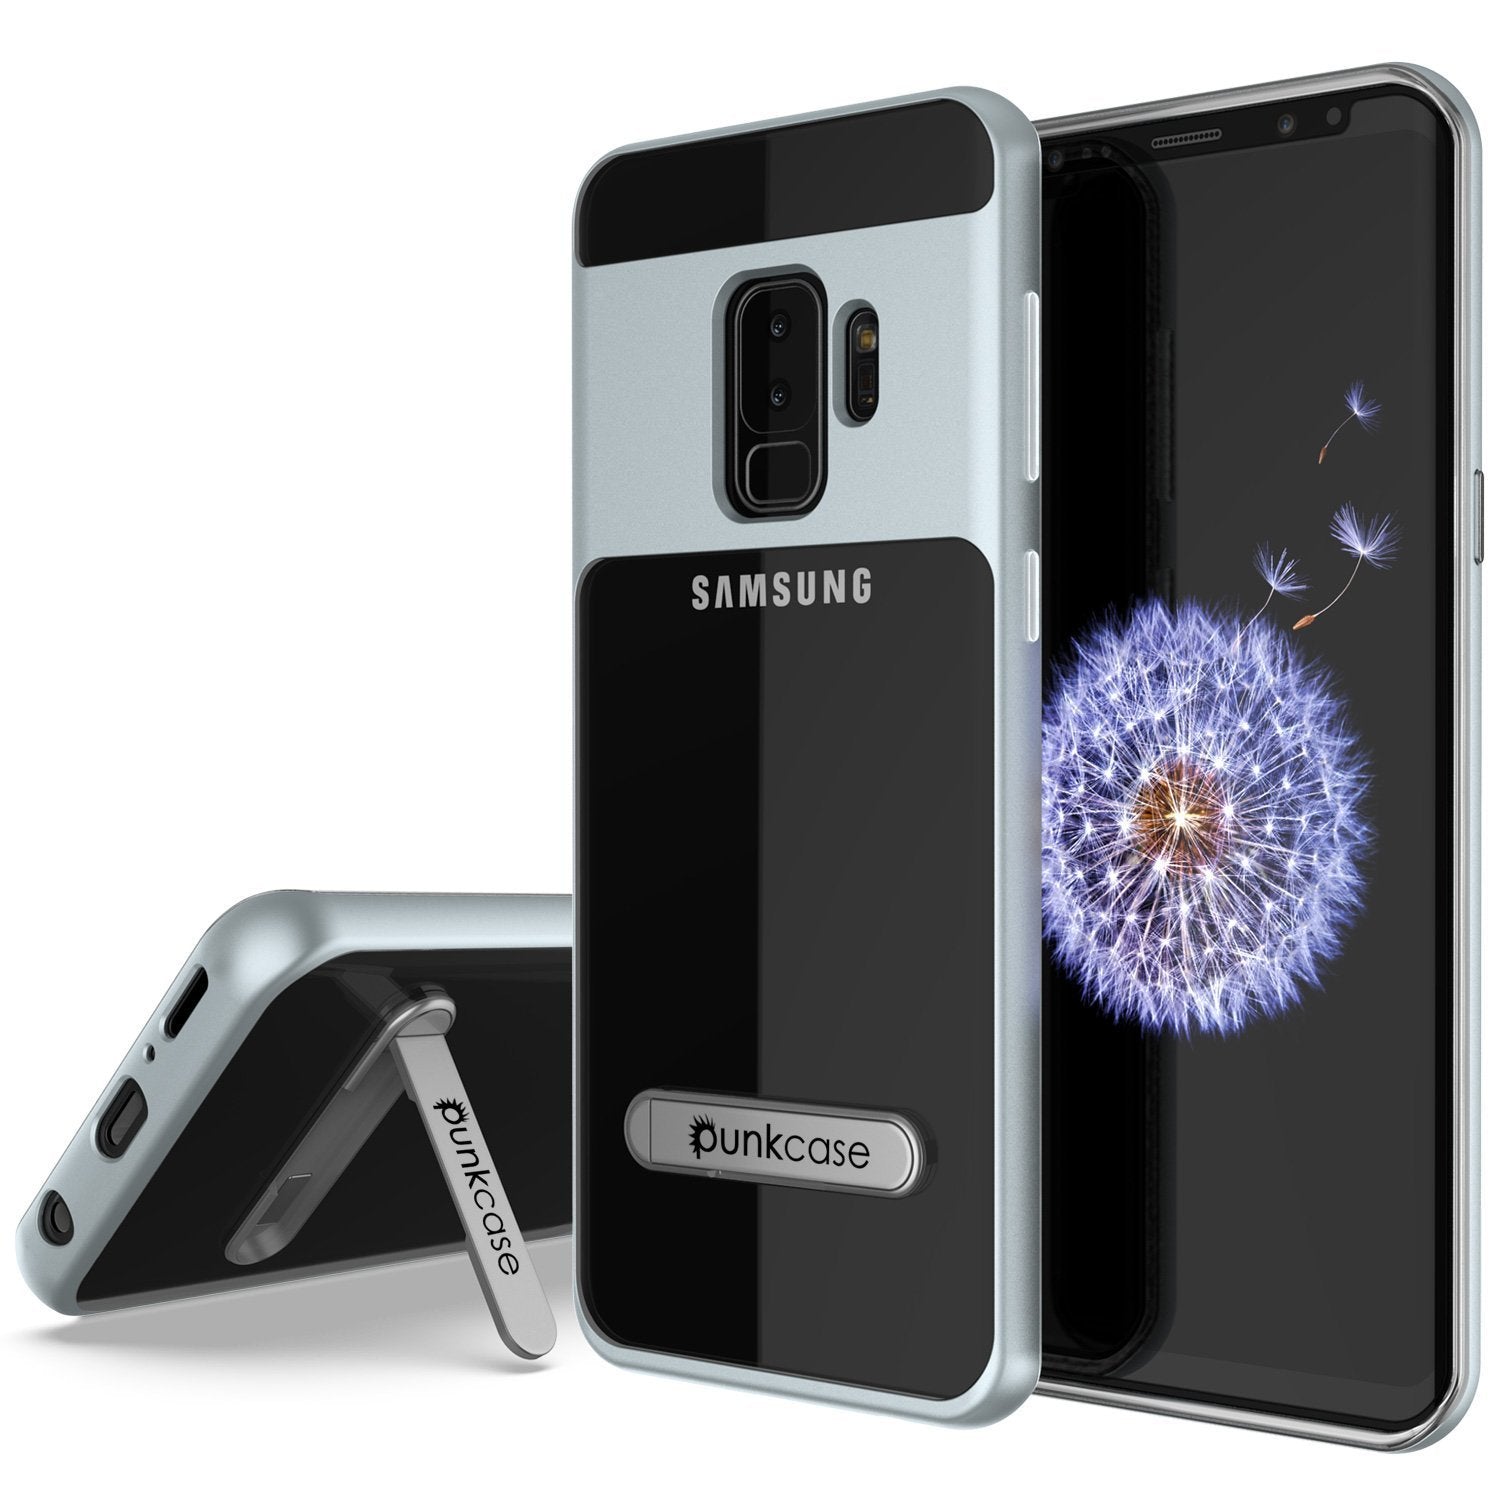 Galaxy S9+ Plus Case, PUNKcase [LUCID 3.0 Series] [Slim Fit] [Clear Back] Armor Cover w/ Integrated Kickstand, Anti-Shock System & PUNKSHIELD Screen Protector for Samsung Galaxy S9+ Plus [Silver]